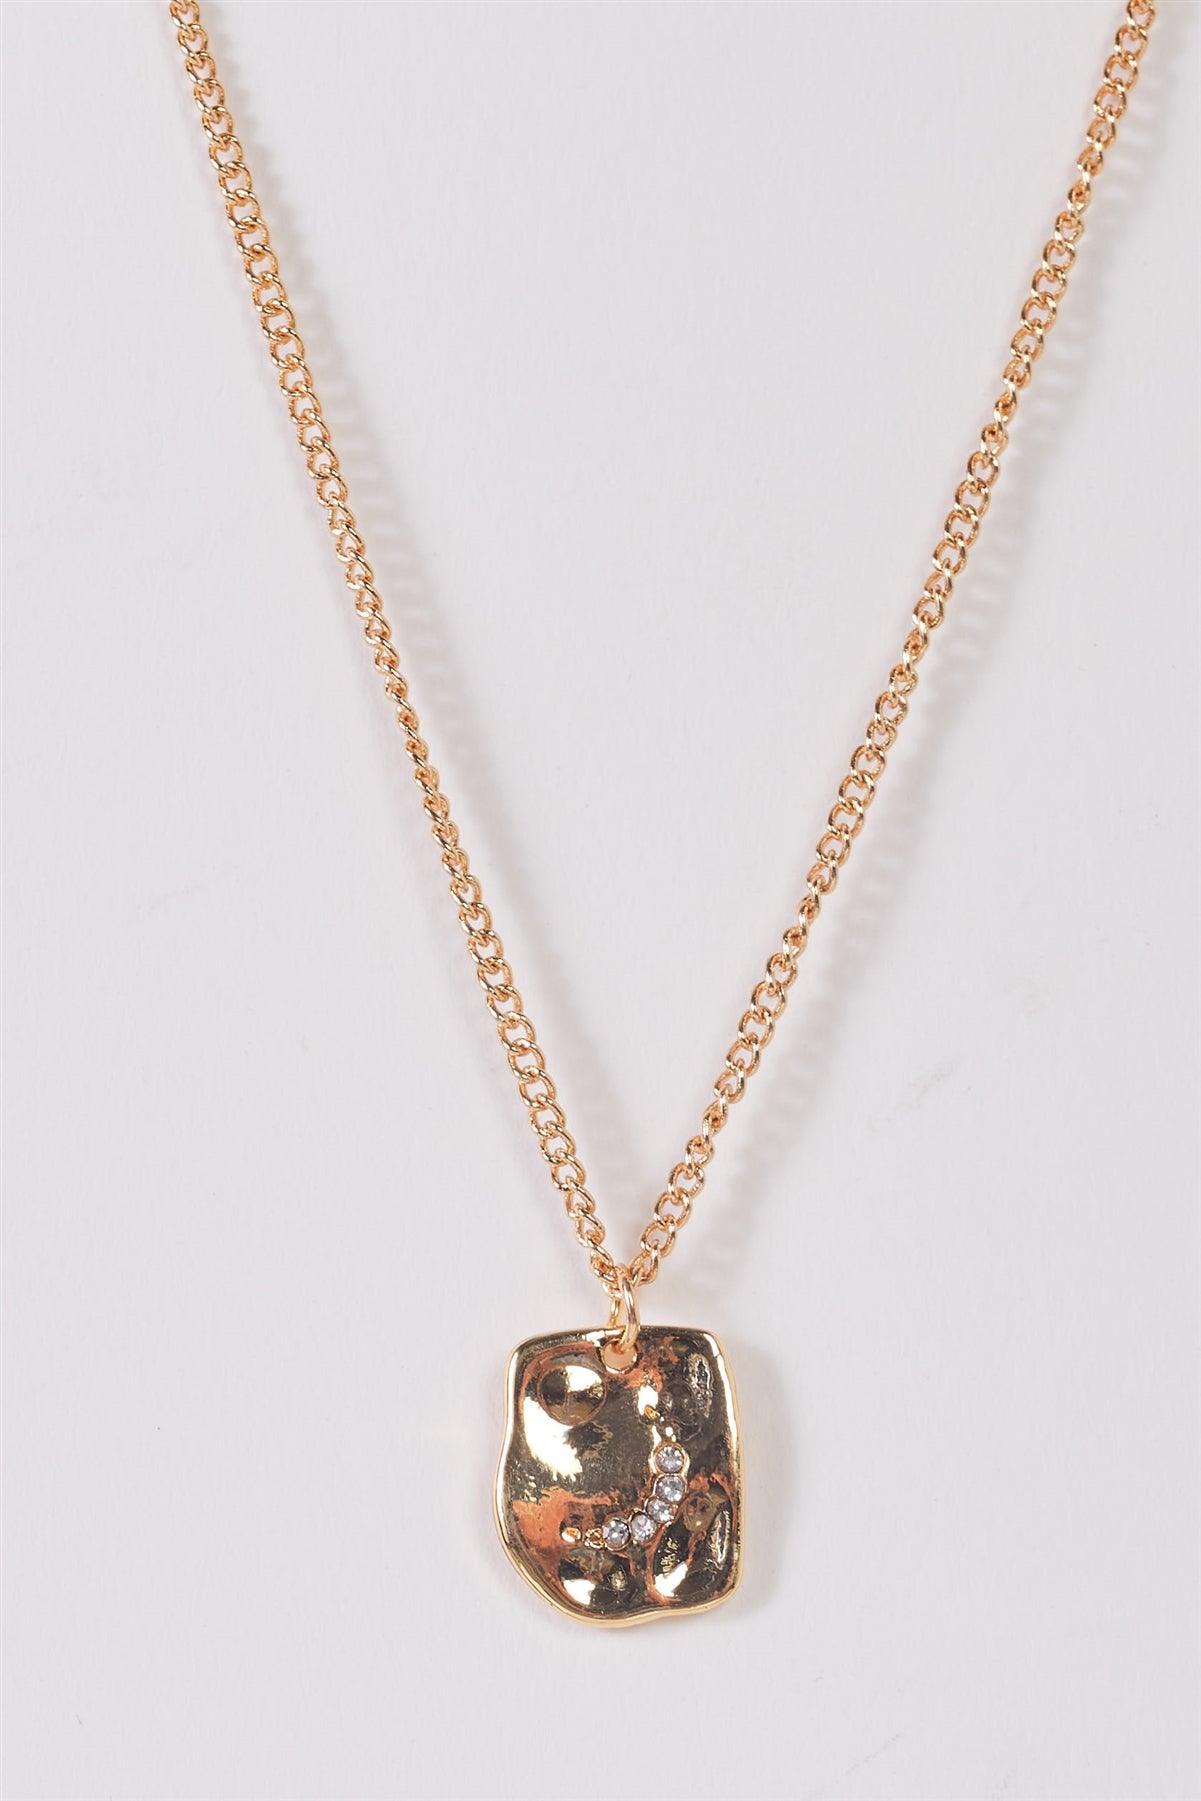 Gold Link Chain With Asymmetrical Textured Rectangle & Faux Crystals Moon Pendant Necklace /3 Pieces